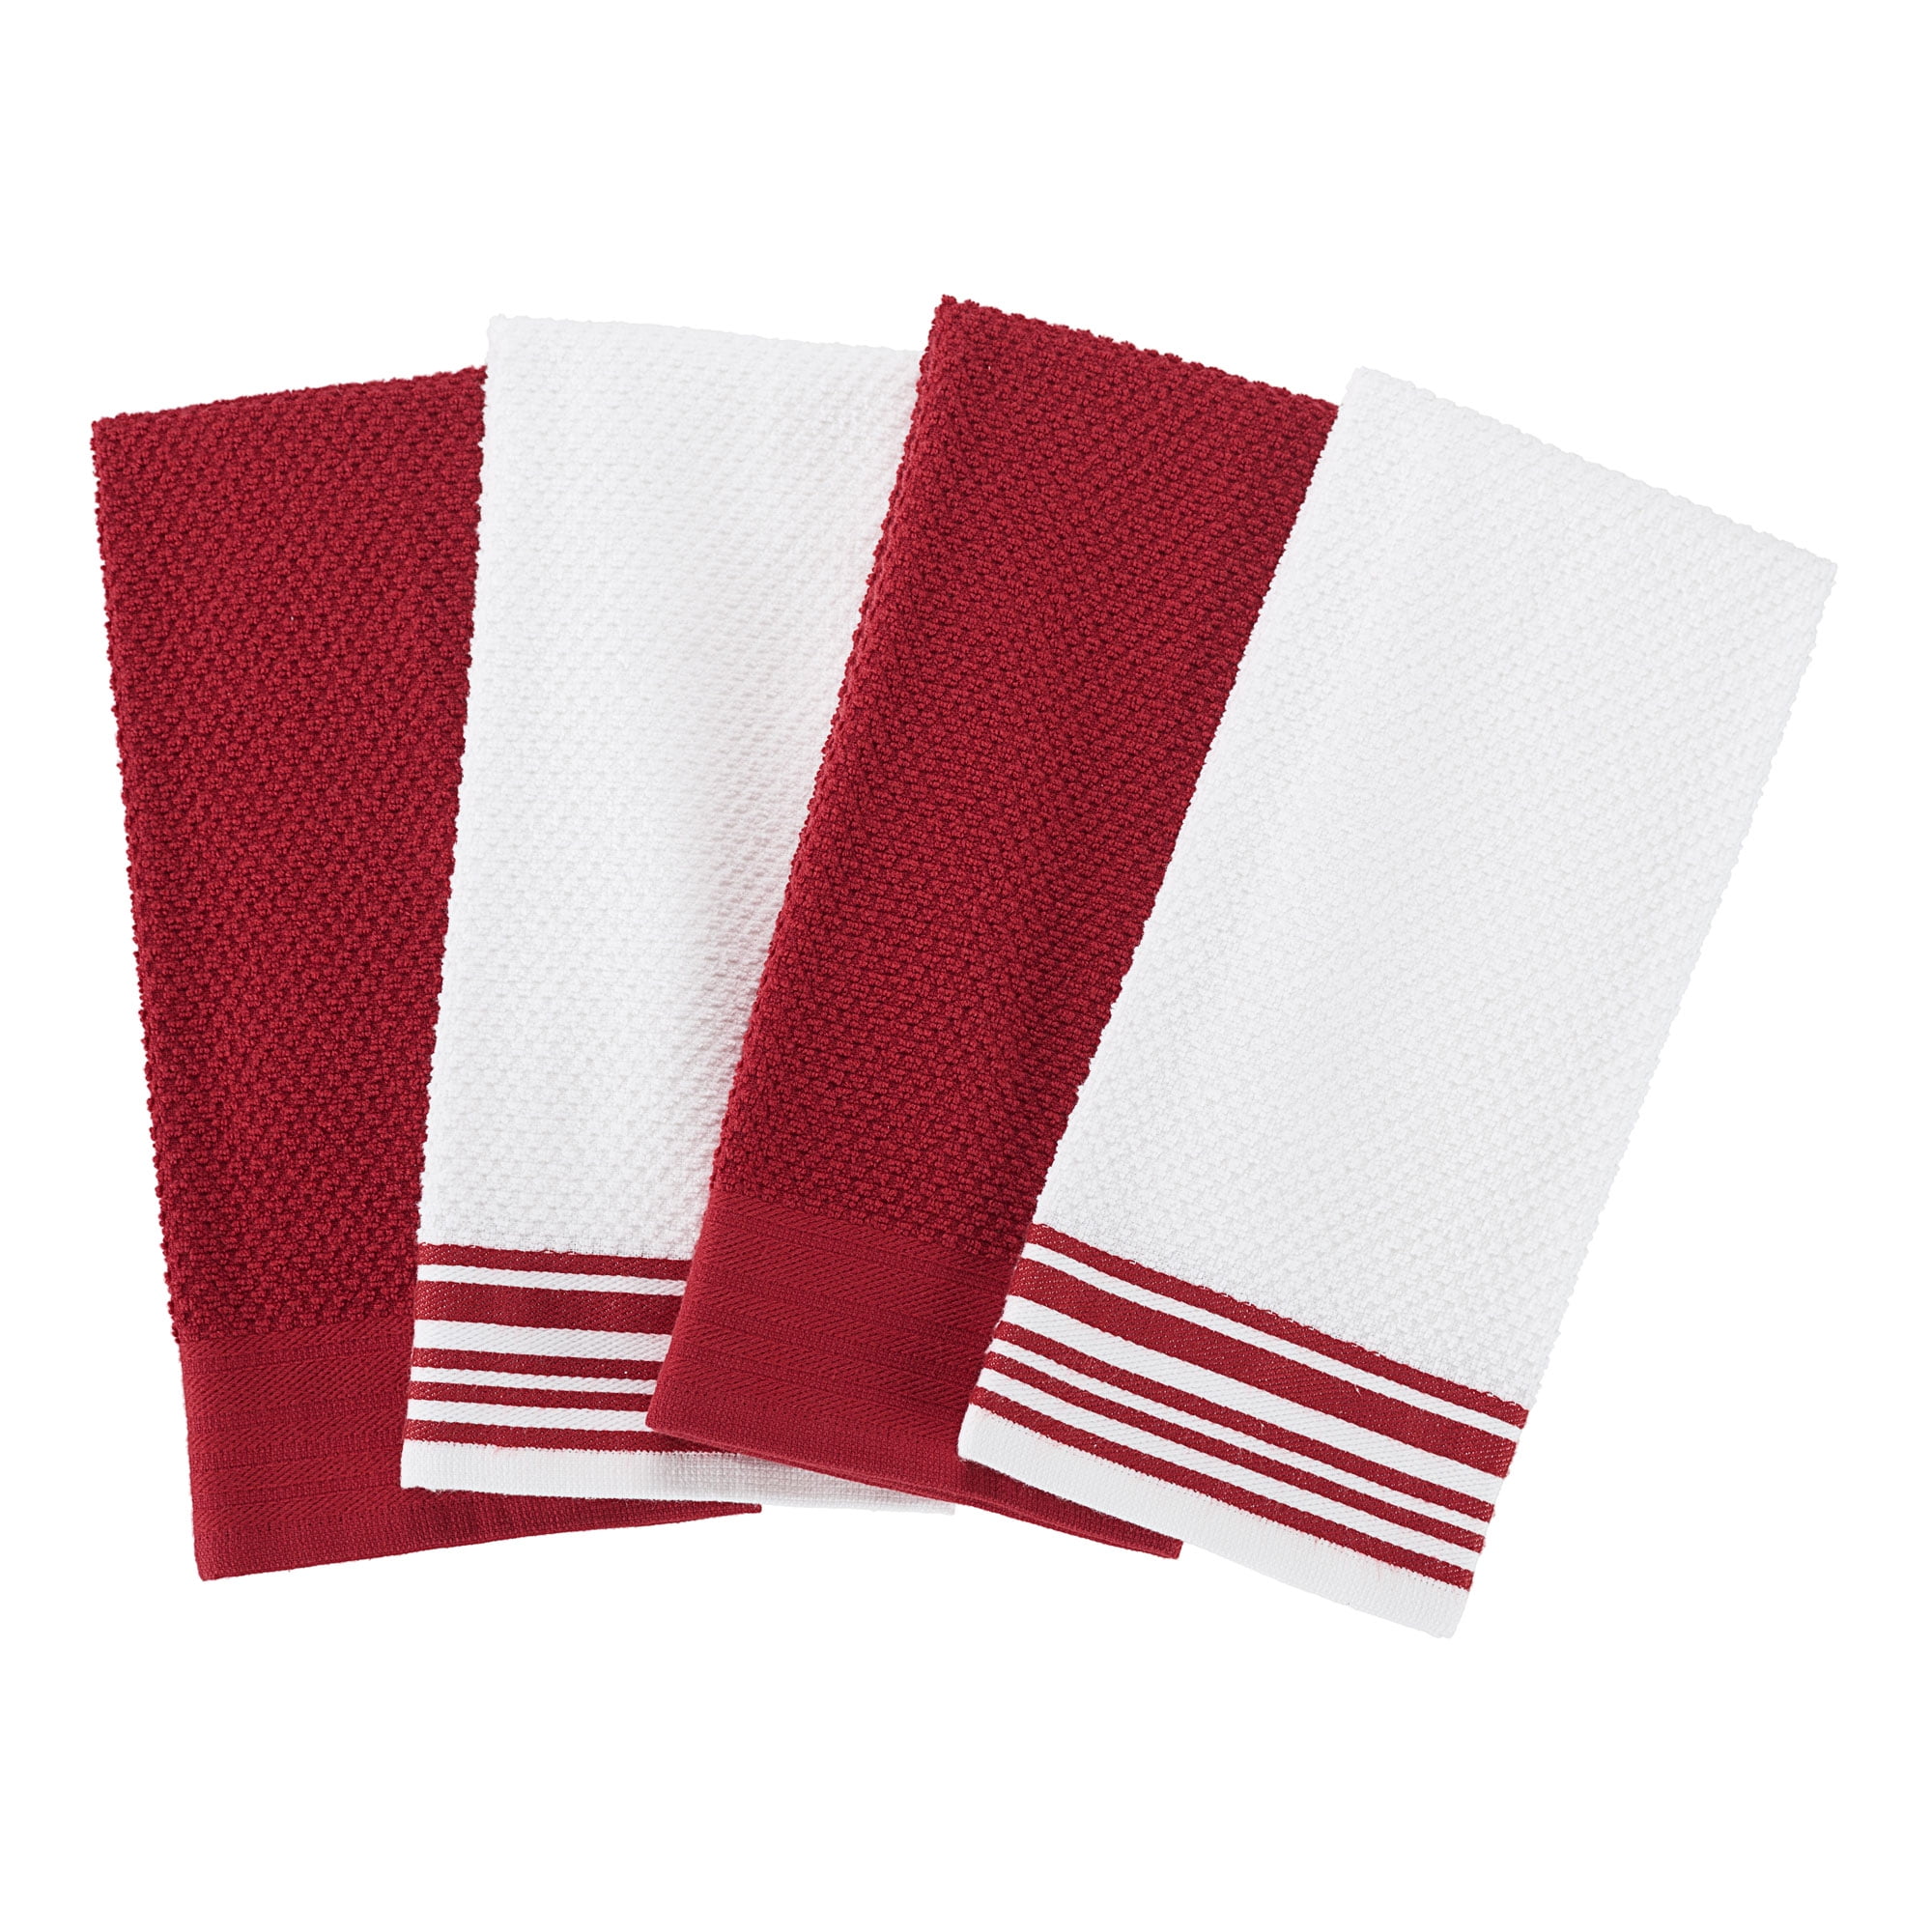 Mainstays 4-Pack 16x26 Woven Kitchen Towel Set, Red Sedona